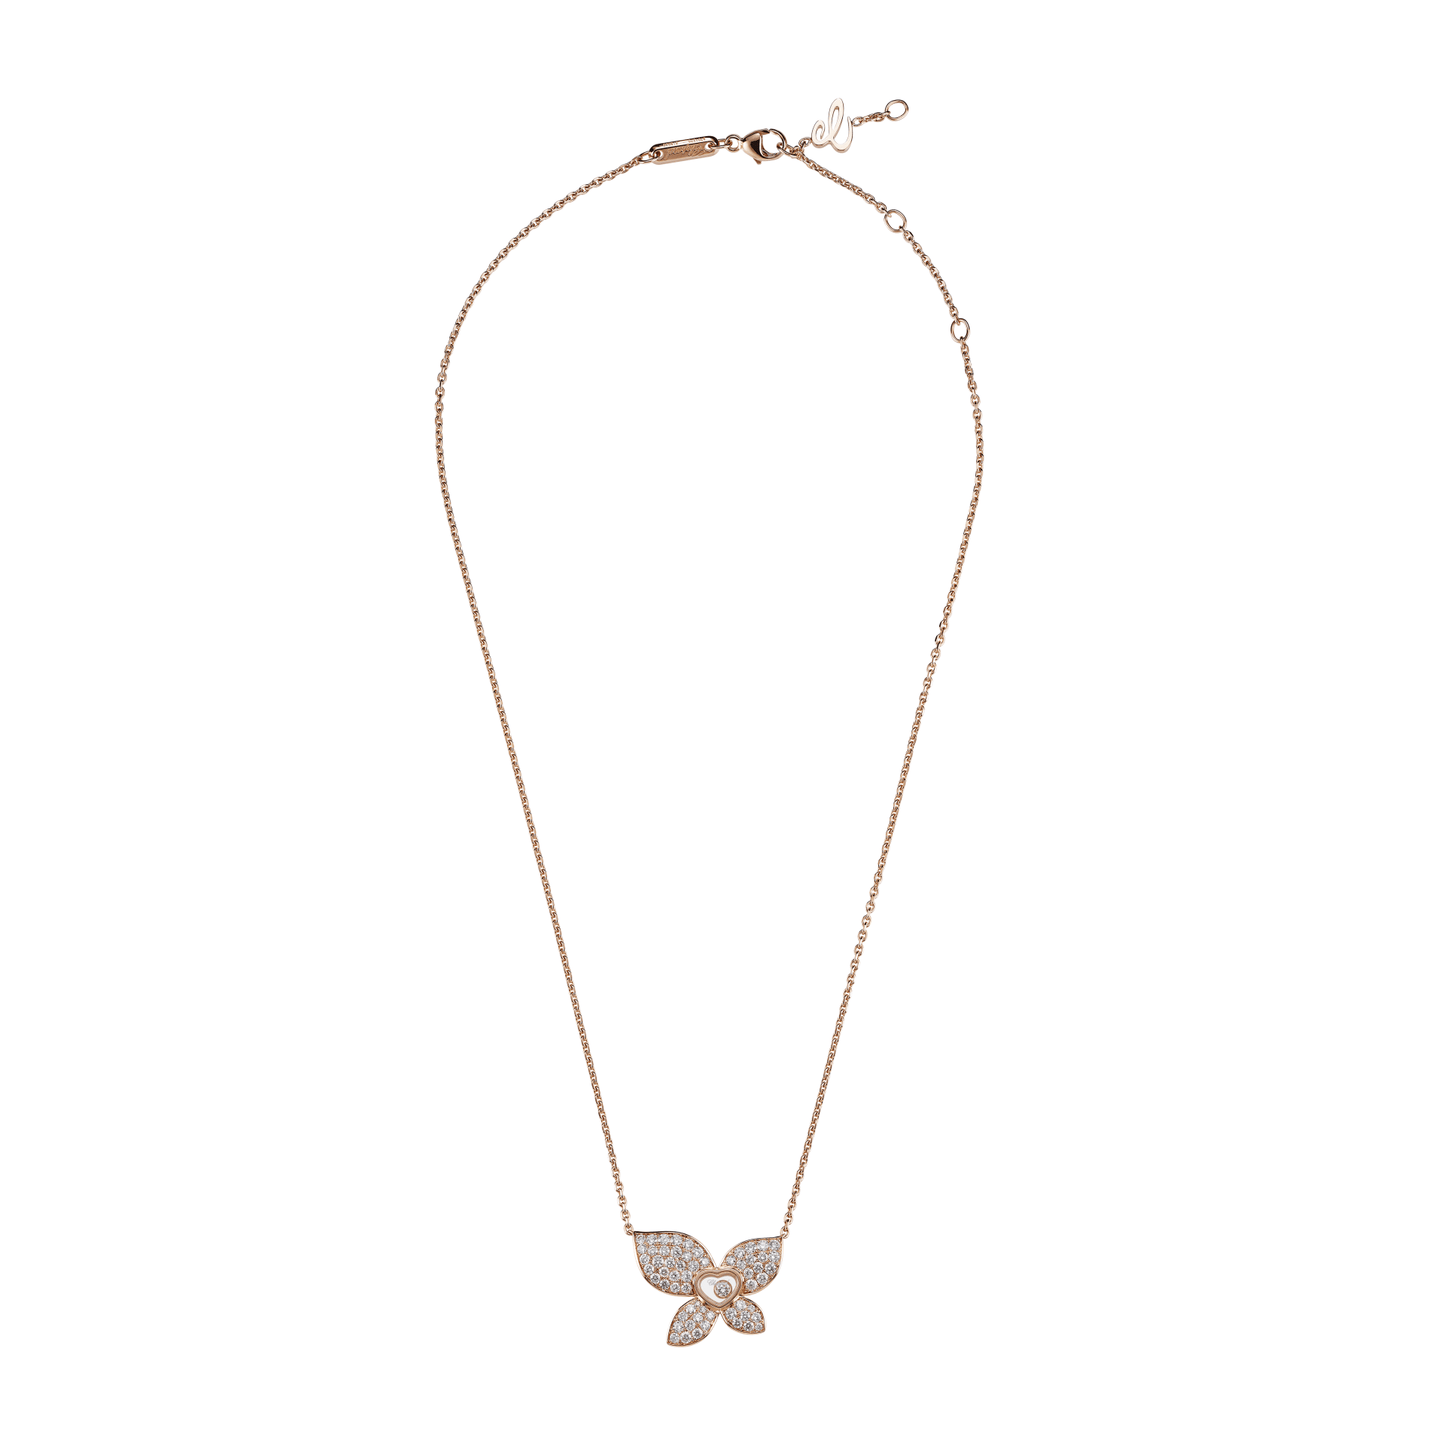 HAPPY BUTTERFLY X MARIAH CAREY NECKLACE, ETHICAL ROSE GOLD, DIAMONDS 818536-5001